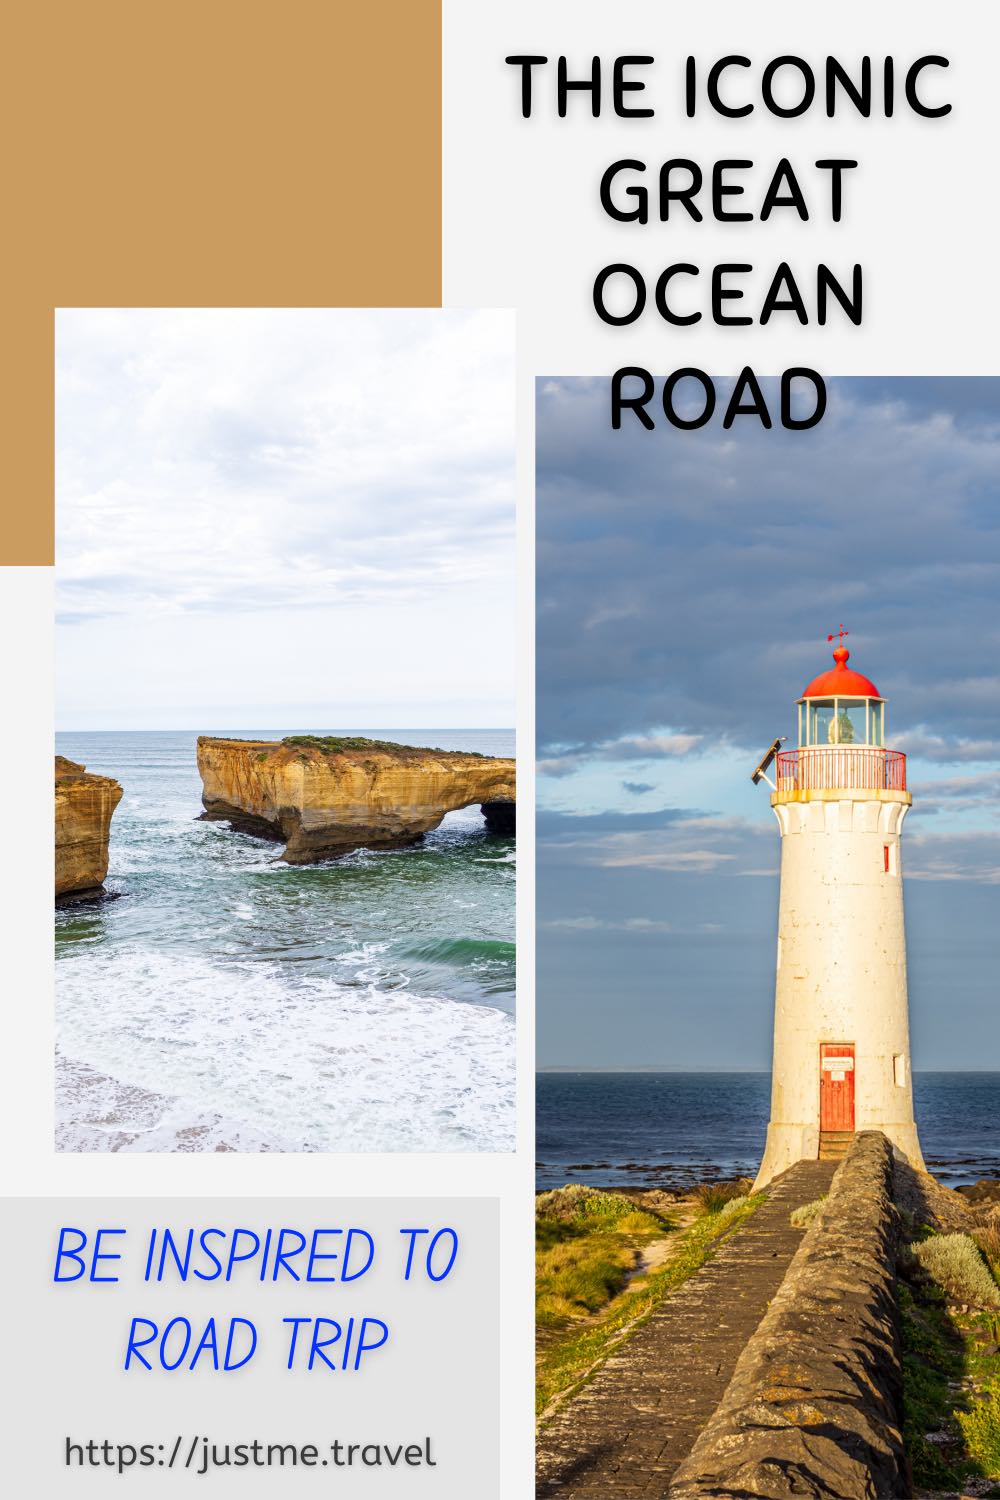 A picture with two images. One image is of an arch rock formation in the ocean near the coast. The second image is of a lighthouse.